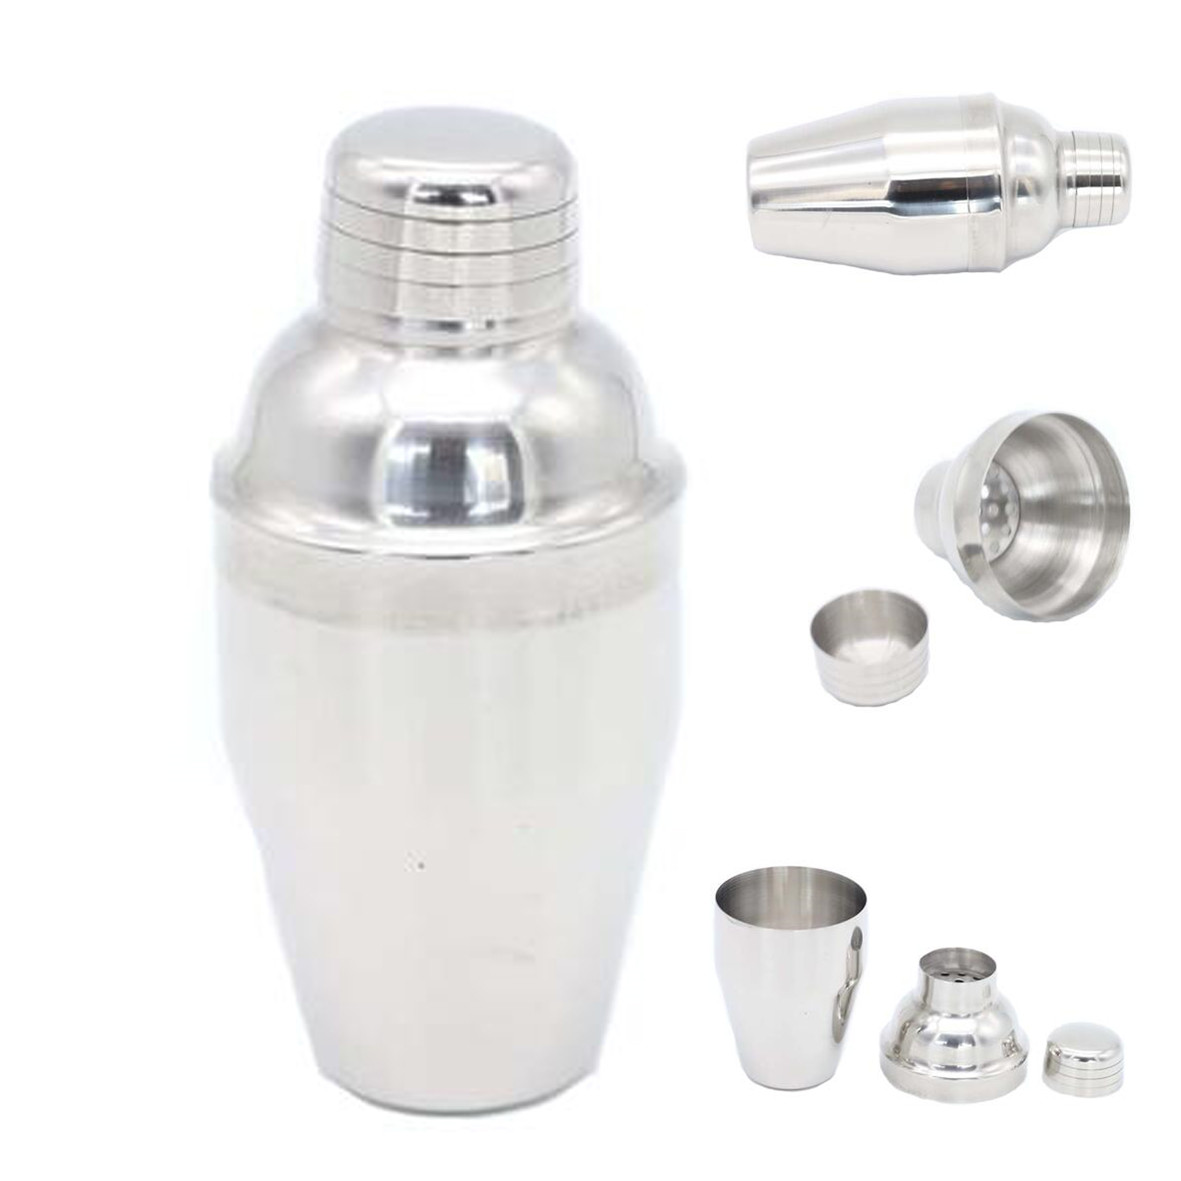 GL-ELY1241 250ml Stainless Steel Cocktail Shaker